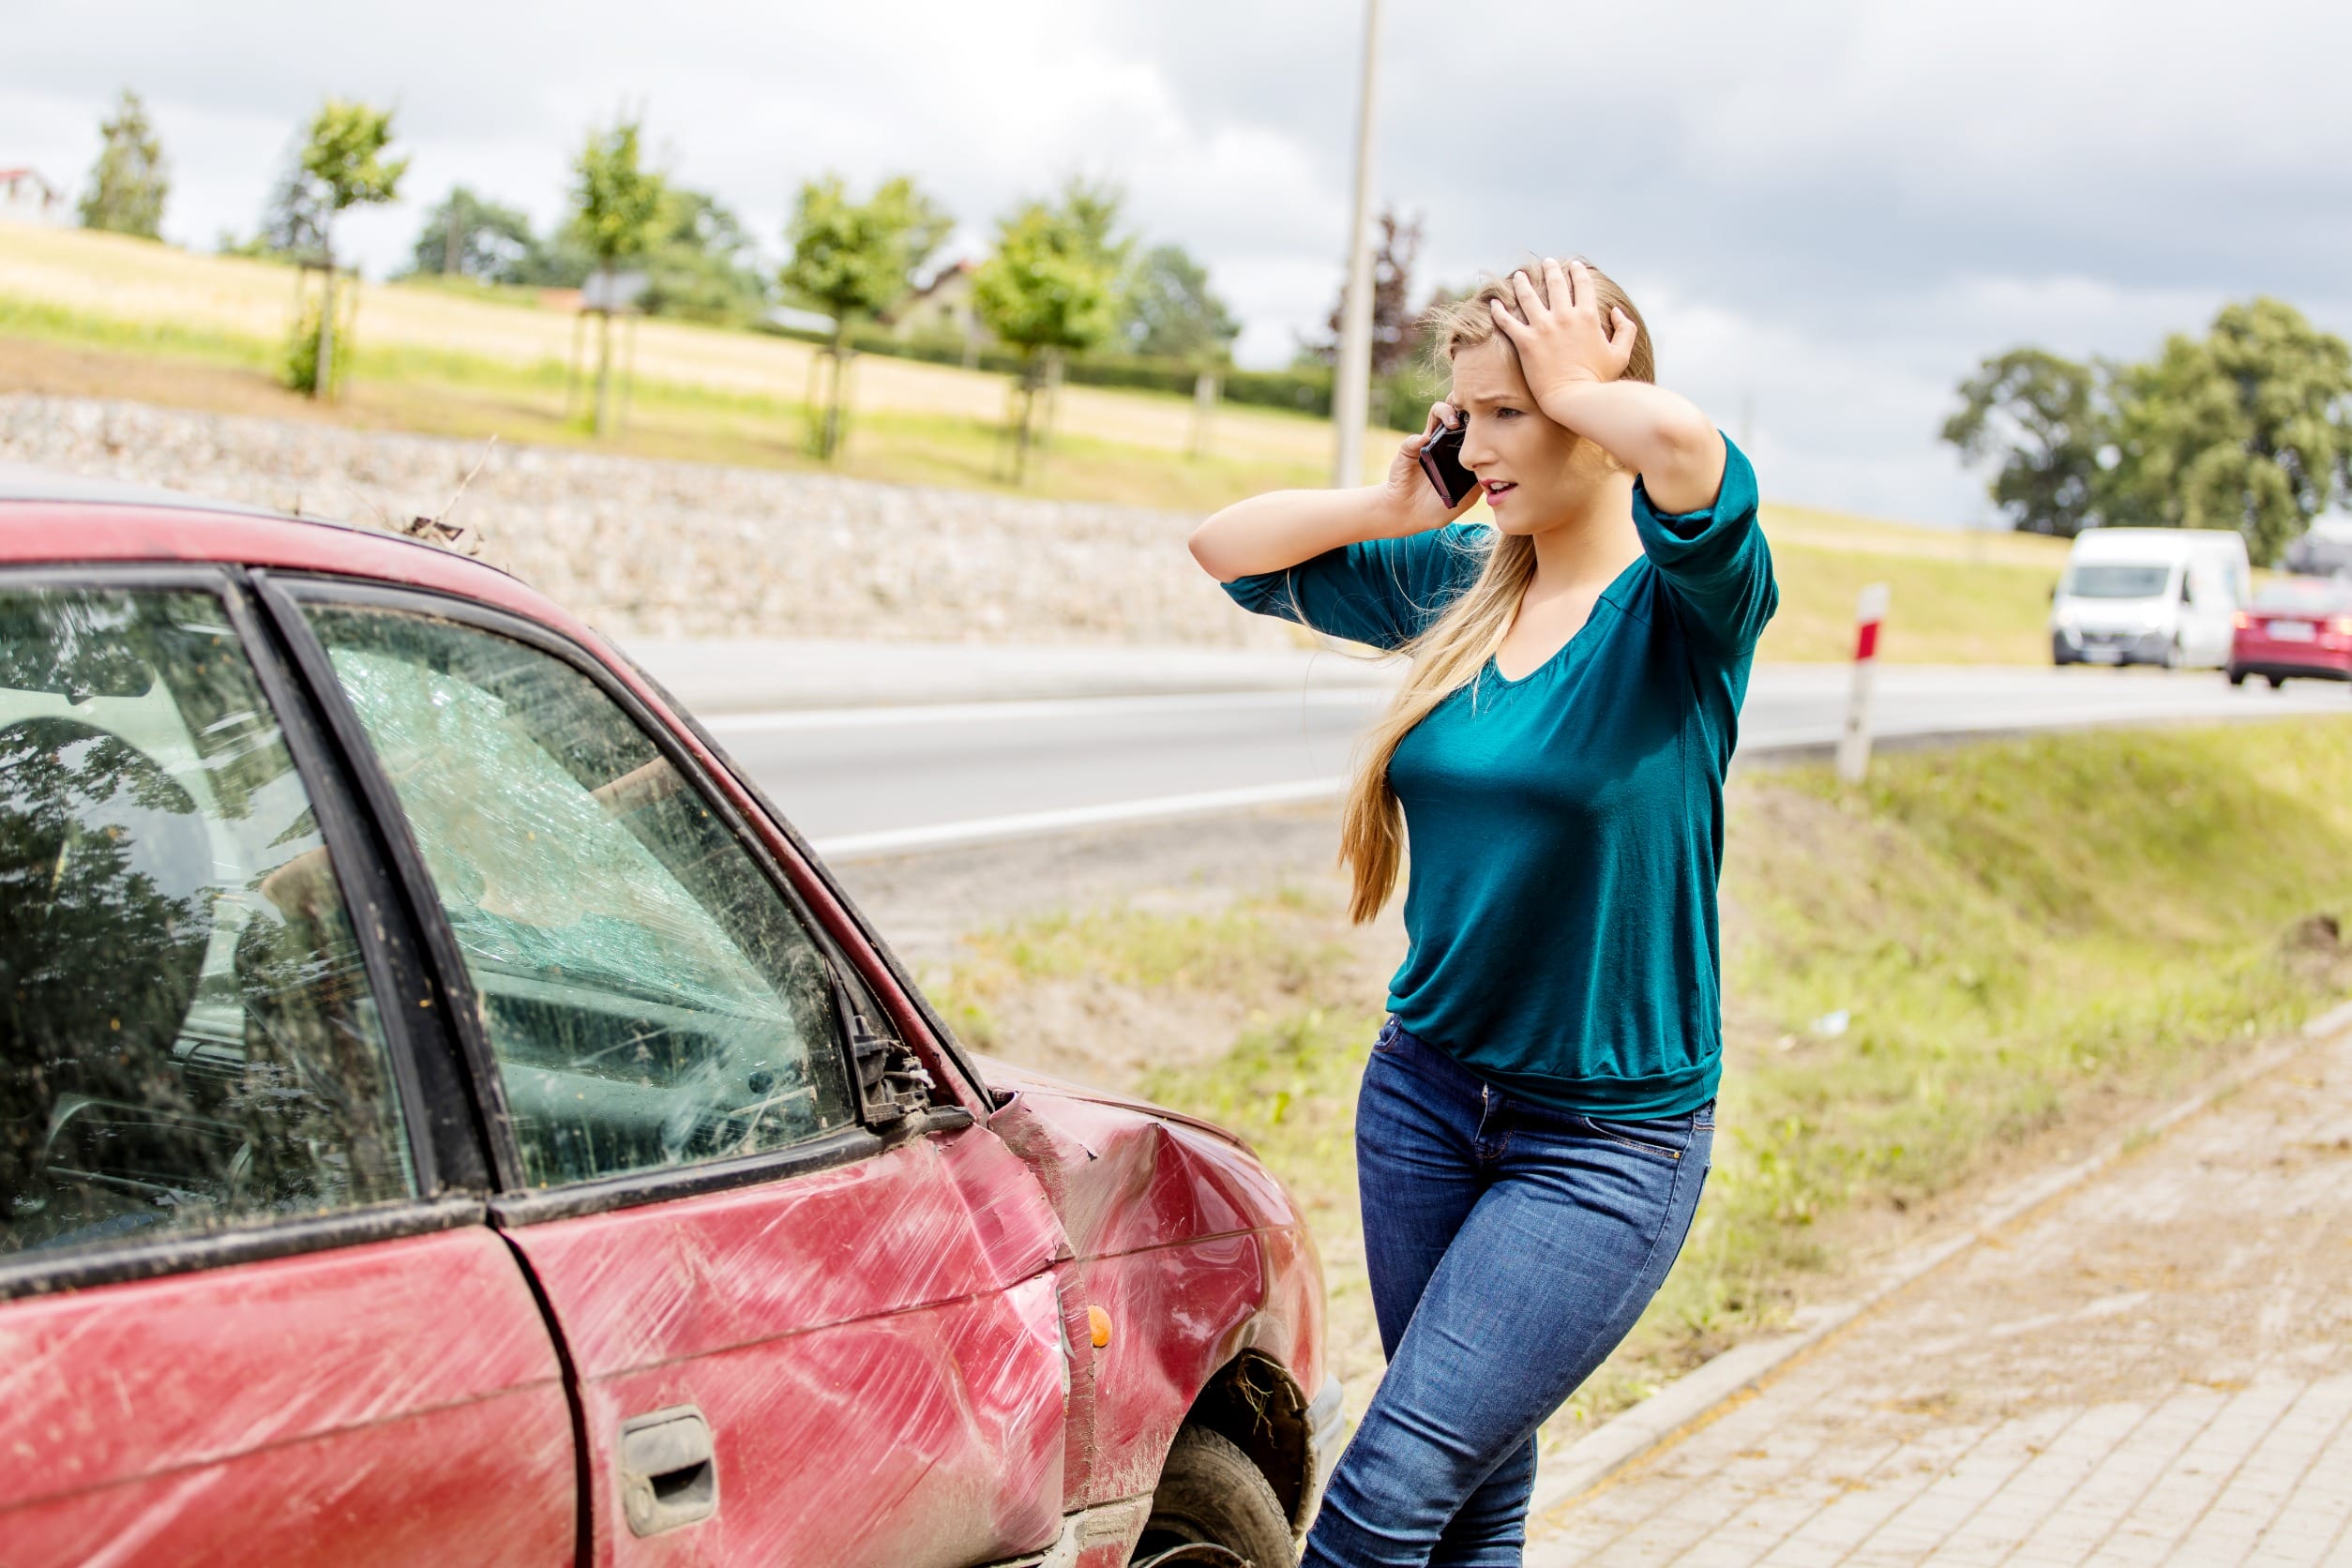 Tips For Gathering Evidence In Your Hit-And-Run Accident Case